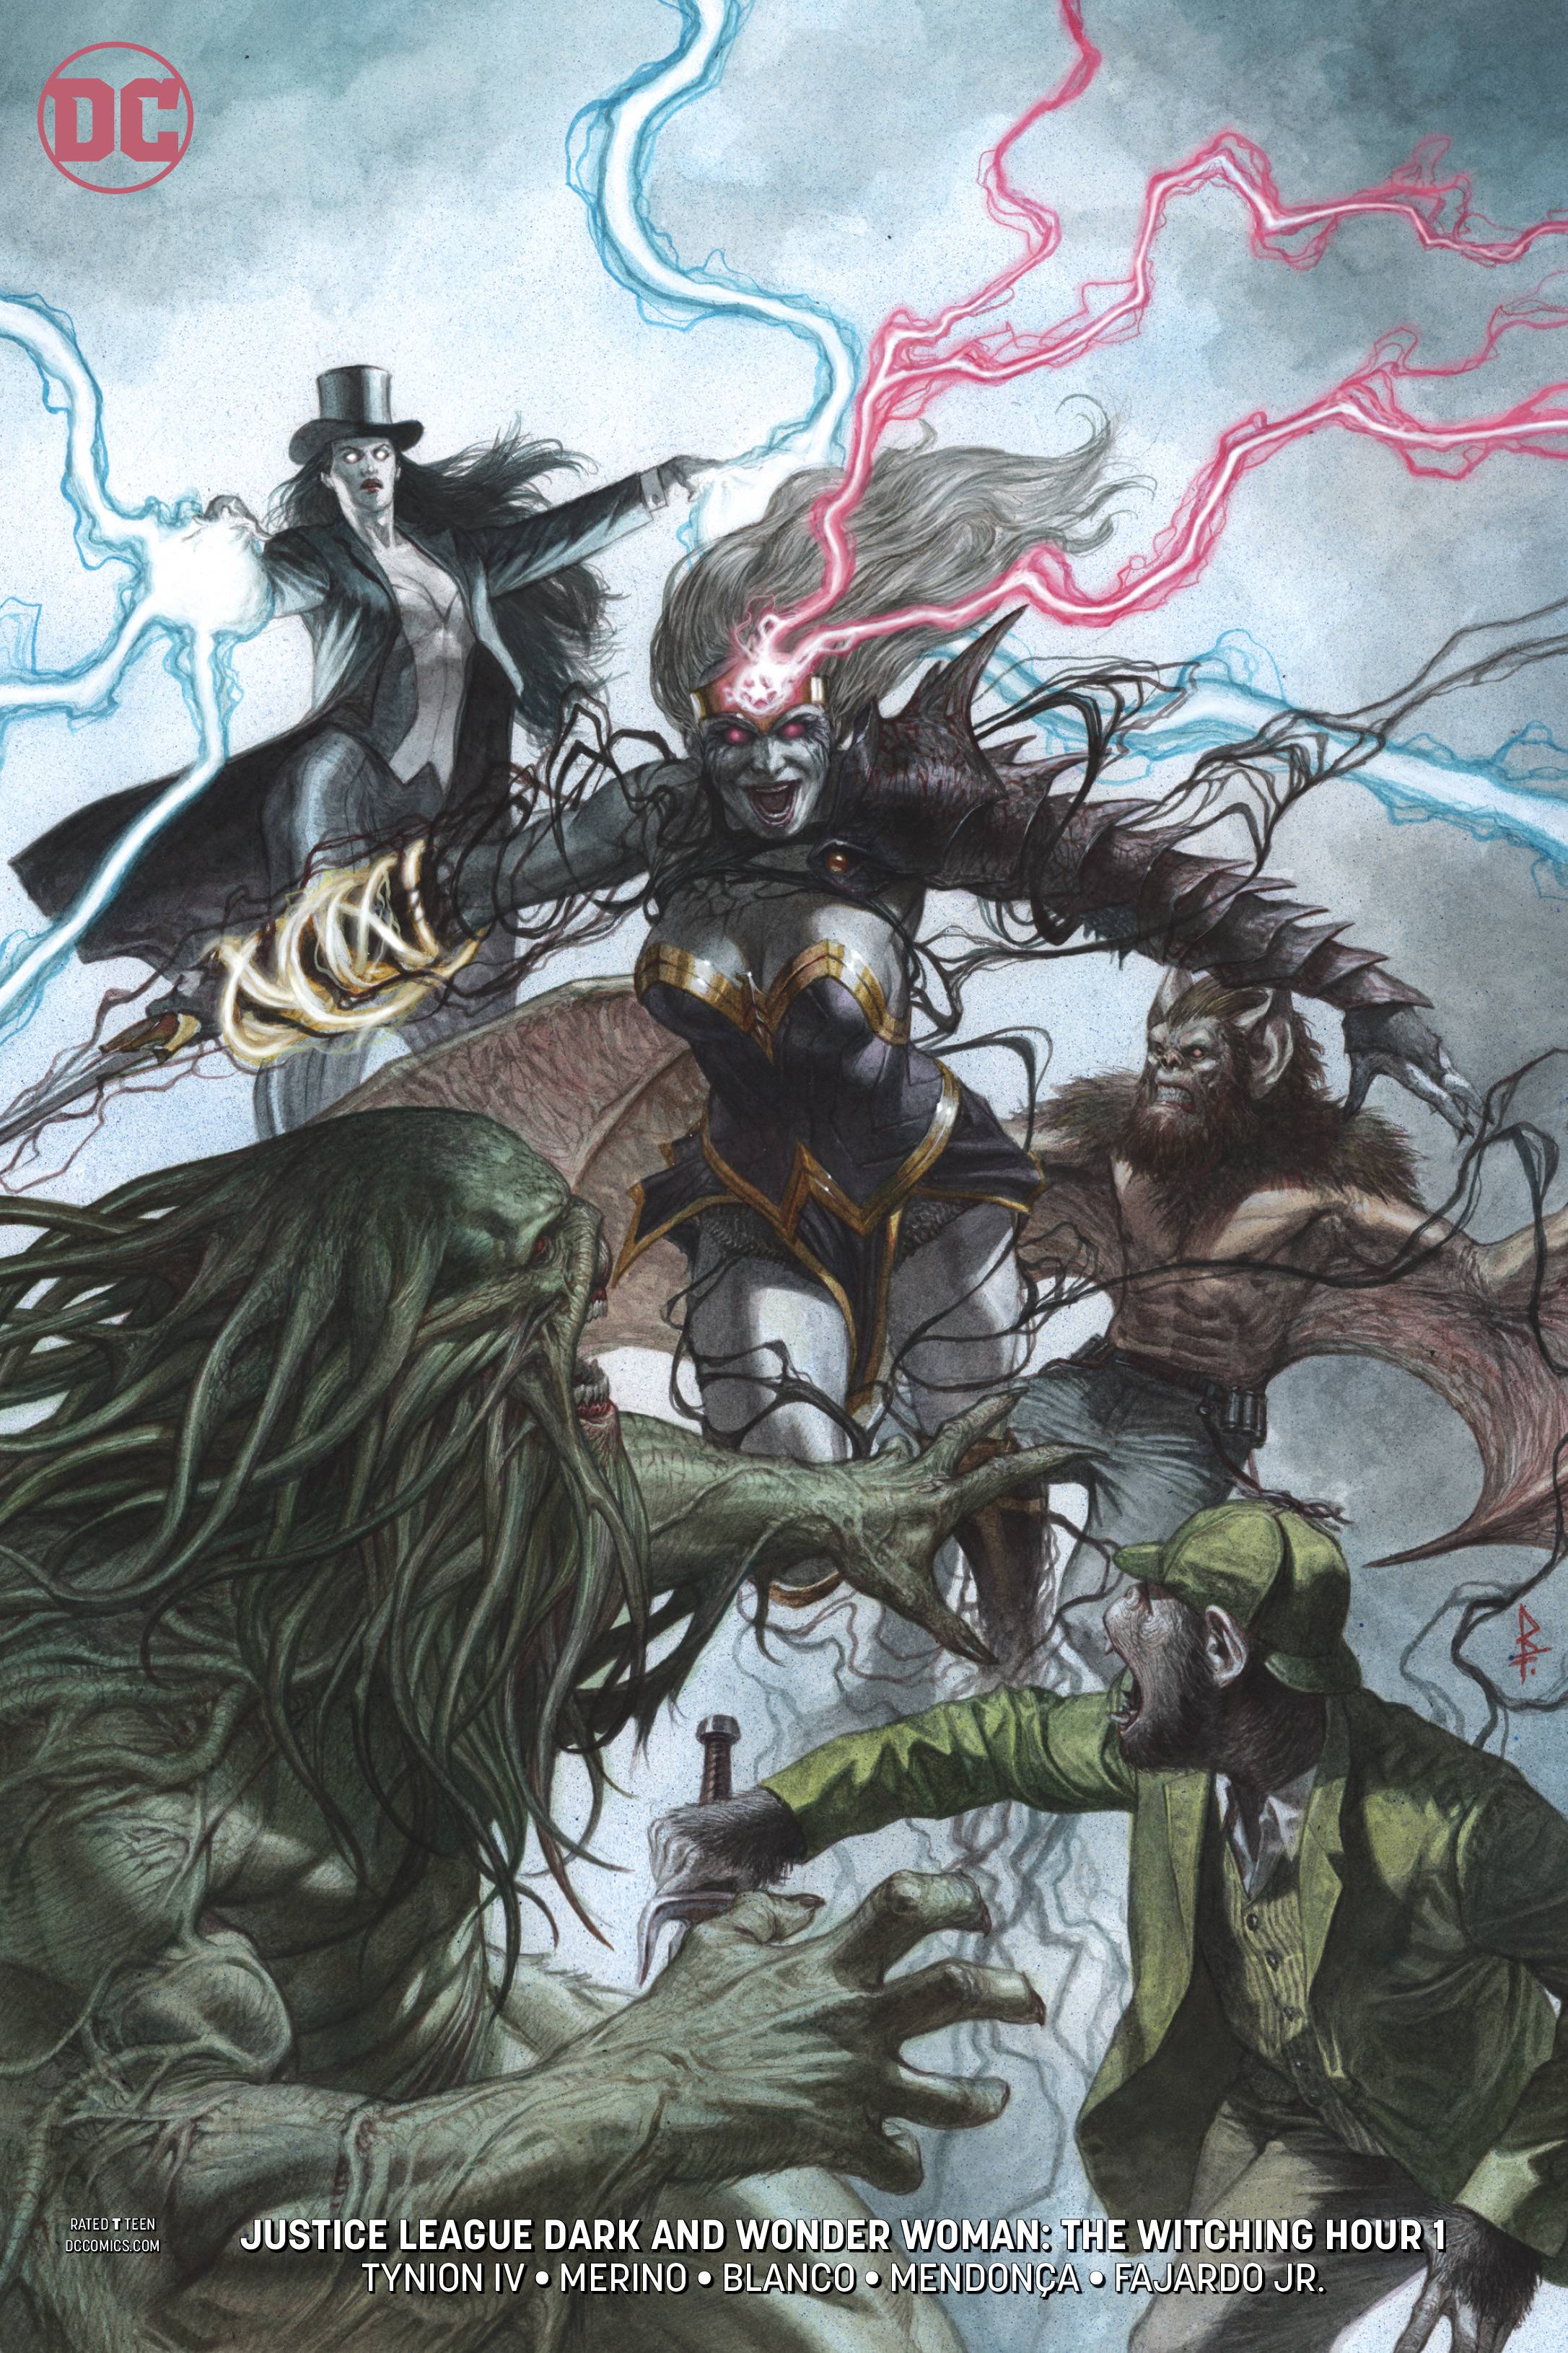 Justice League Dark & Wonder Woman The Witching Hour #1 Variant Edition